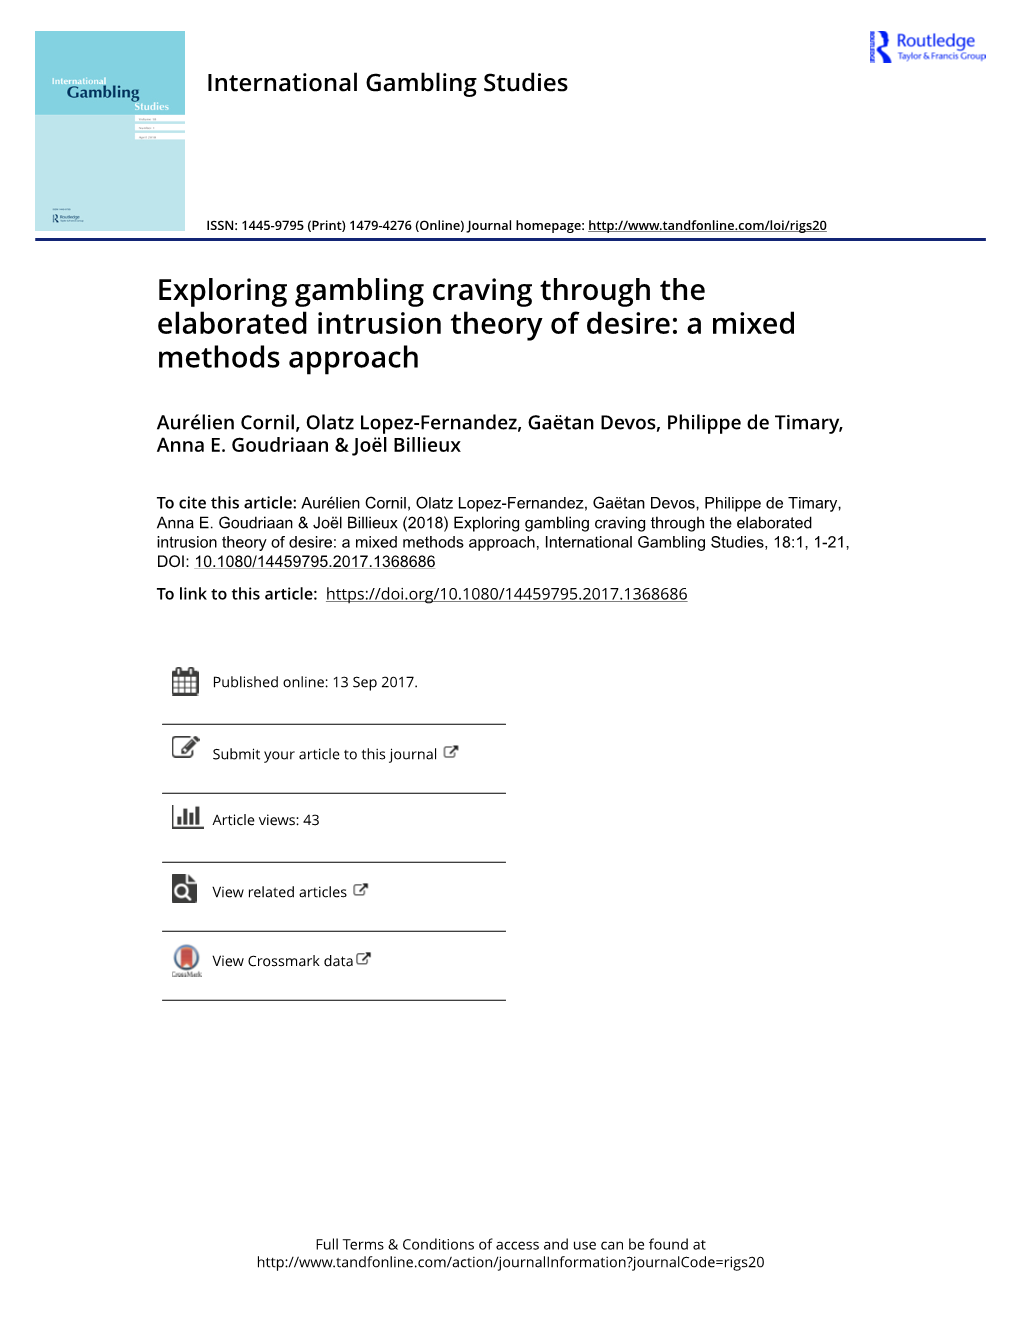 Exploring Gambling Craving Through the Elaborated Intrusion Theory of Desire: a Mixed Methods Approach